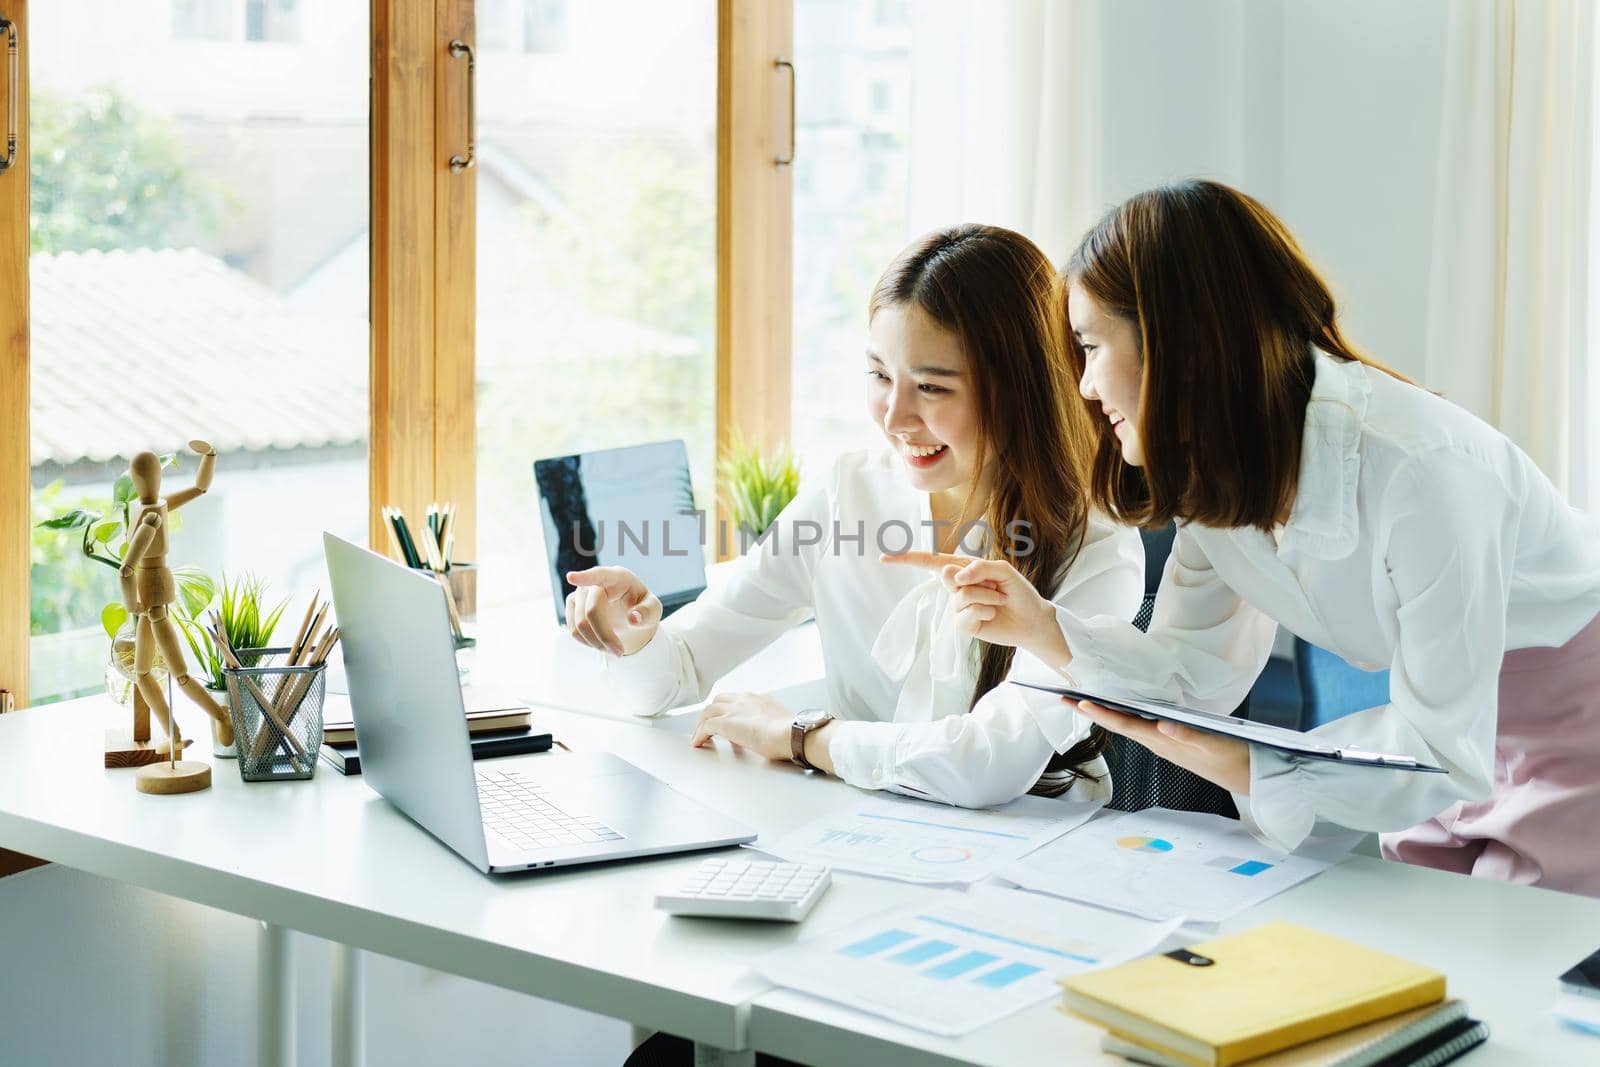 Consulting, learning, marketing, investment, finance, data analysis, research, two Asian women smiling pointing computer , sitting and analyzing financial statements and using computers at work